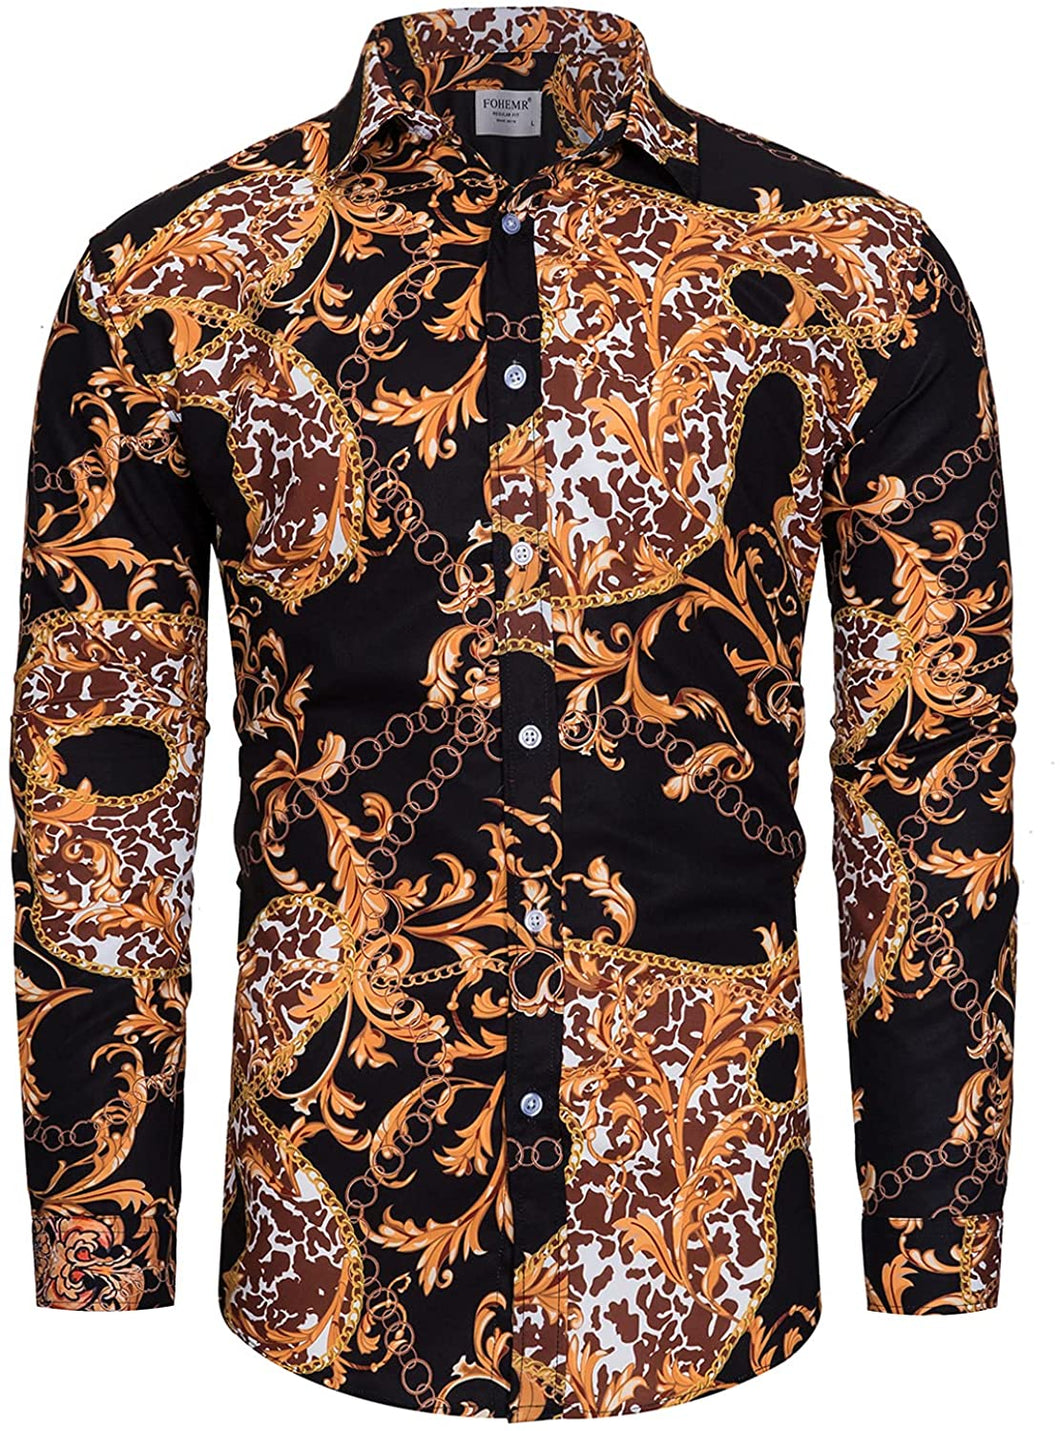 Men's Red and Black Long Sleeve Baroque Print Button Down Shirt